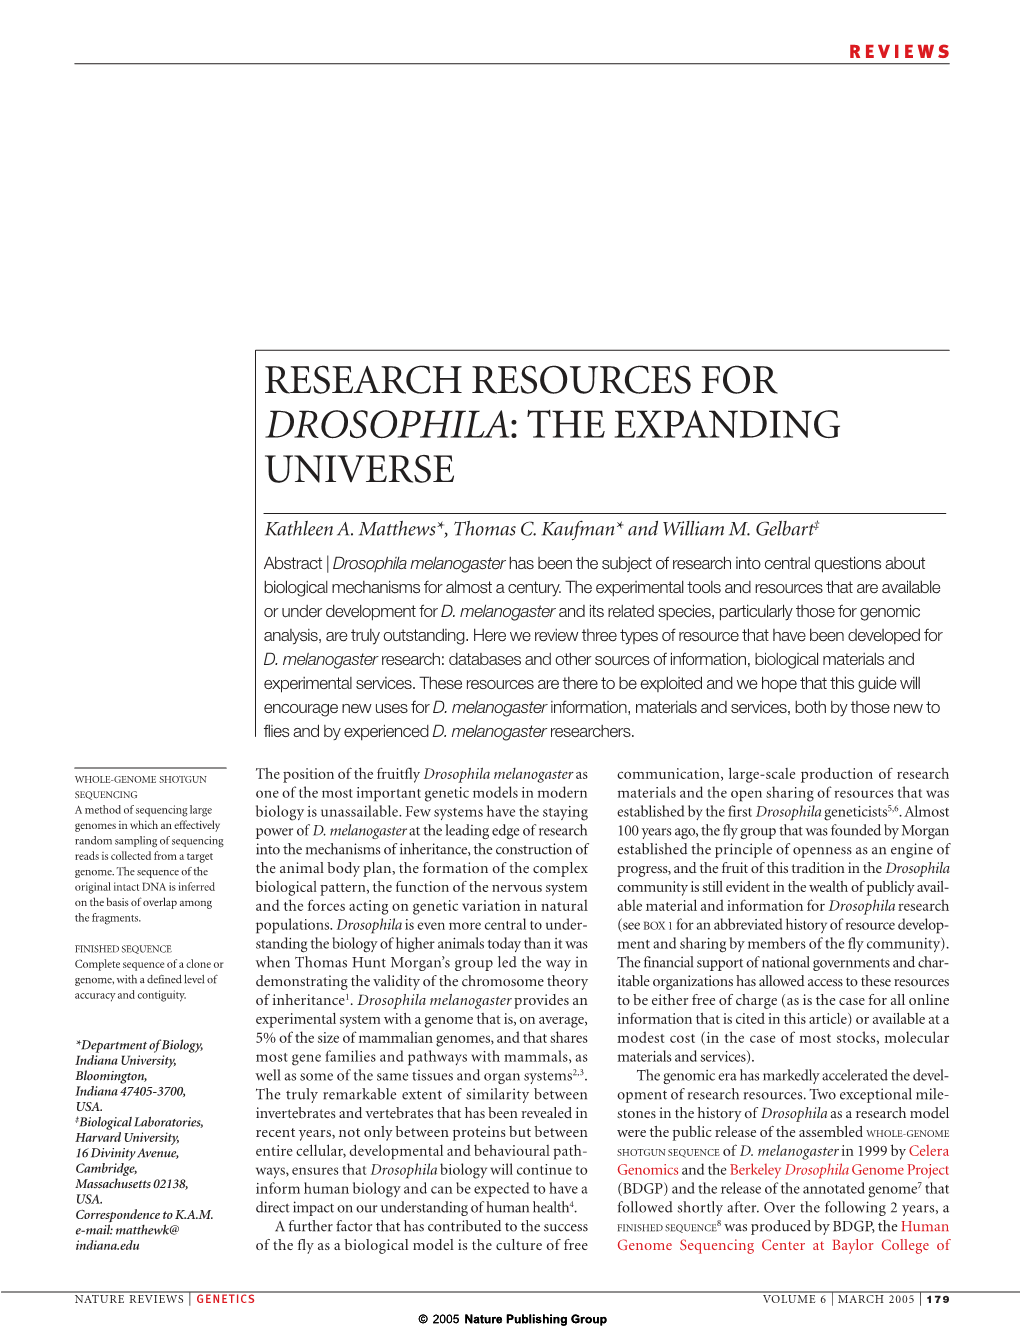 Research Resources for Drosophila: the Expanding Universe